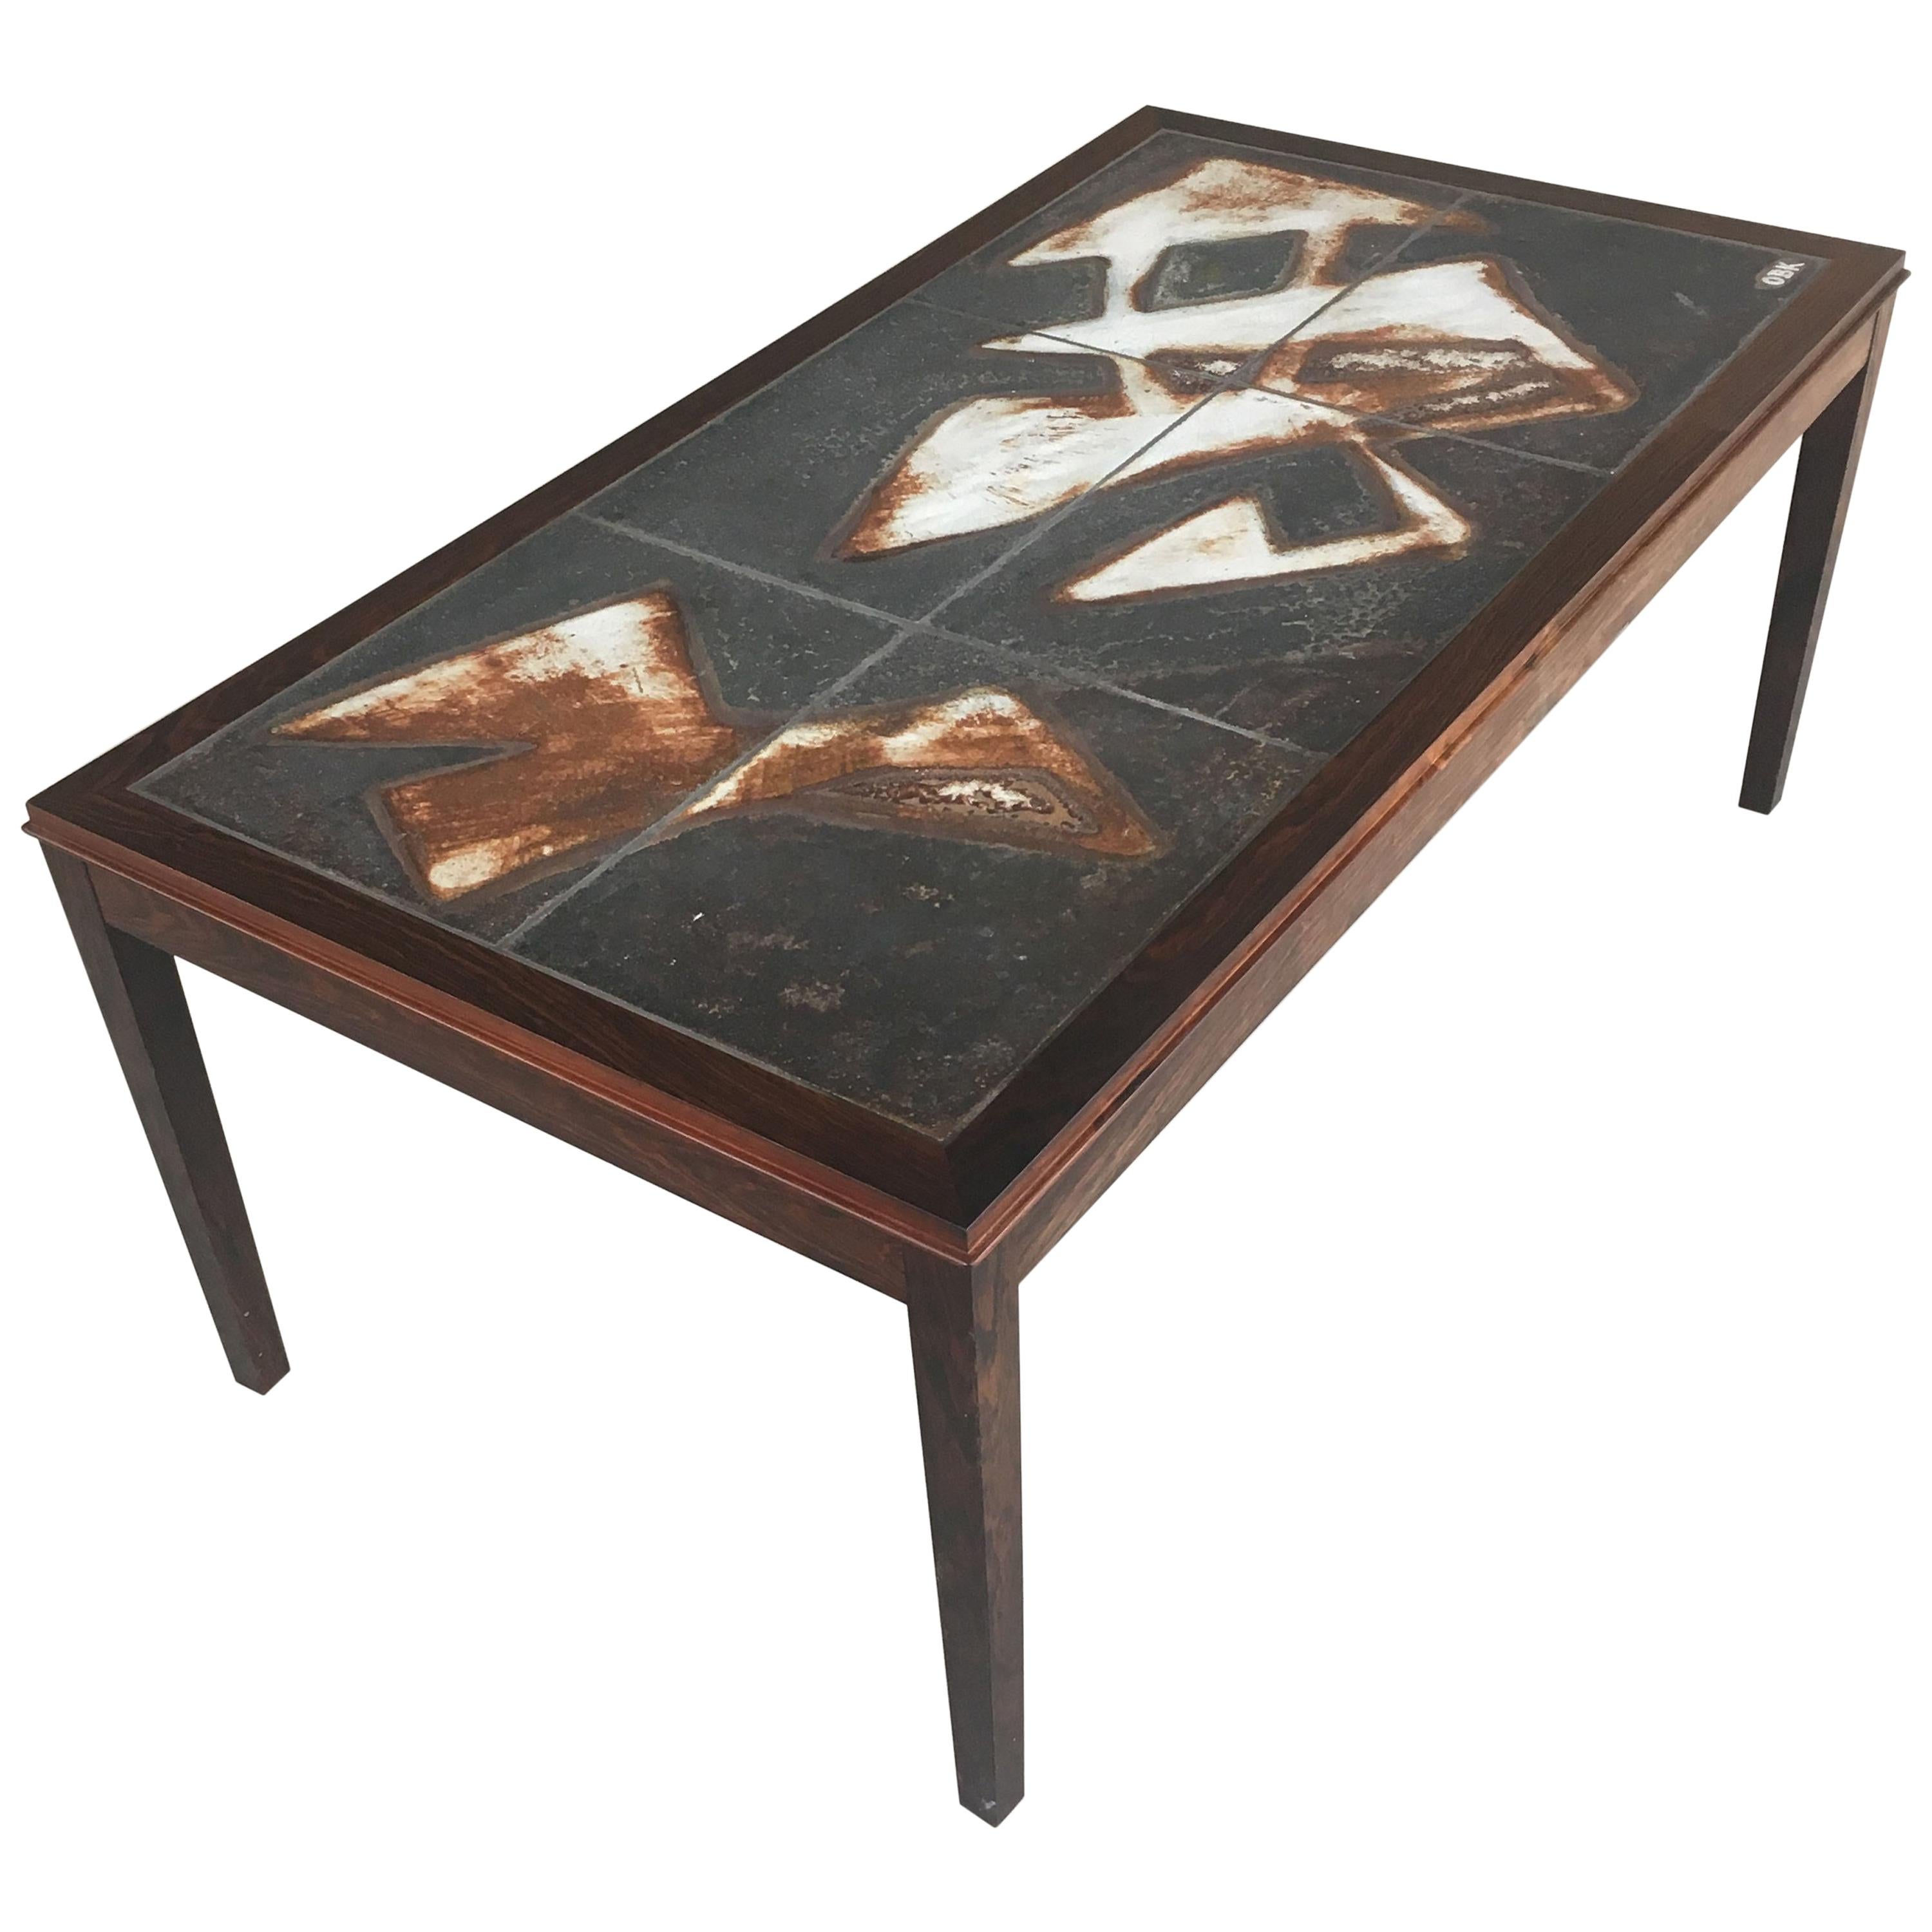 1960s Ole Bjorn Krüger Fully Restored Tile Topped Coffee Table in Rosewood For Sale